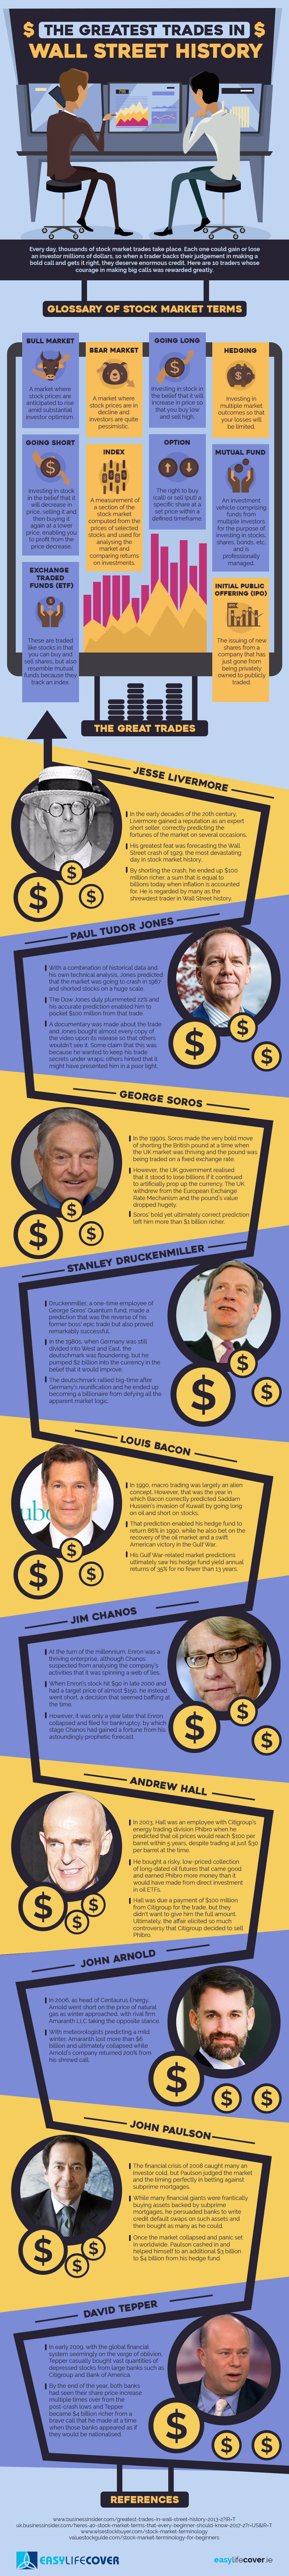 The Greatest Trades in Wall Street History